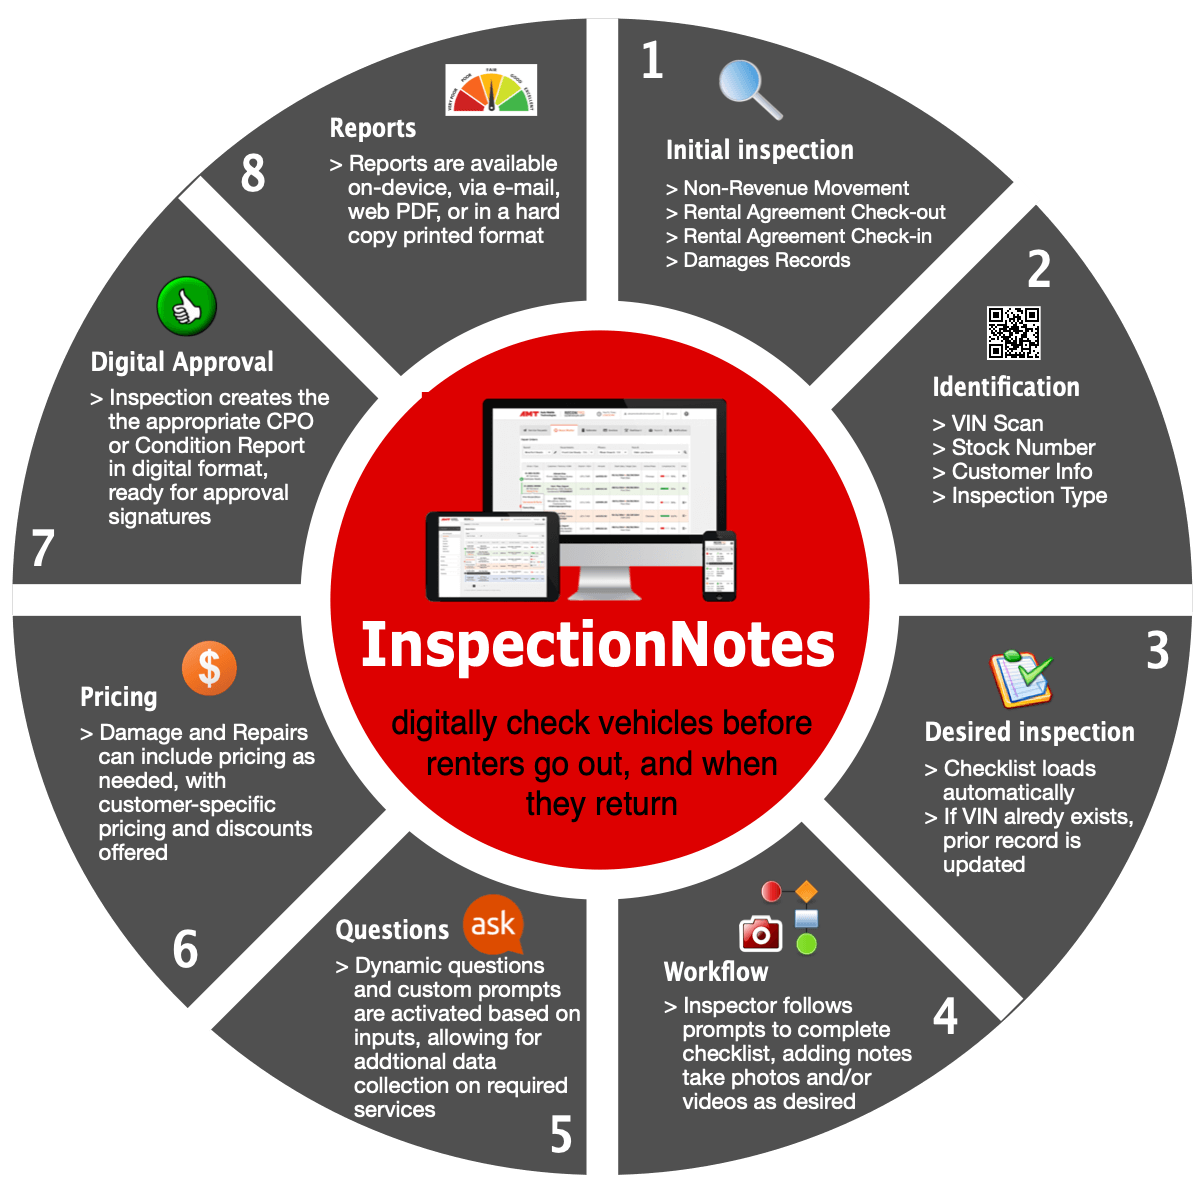 InspectionNotes